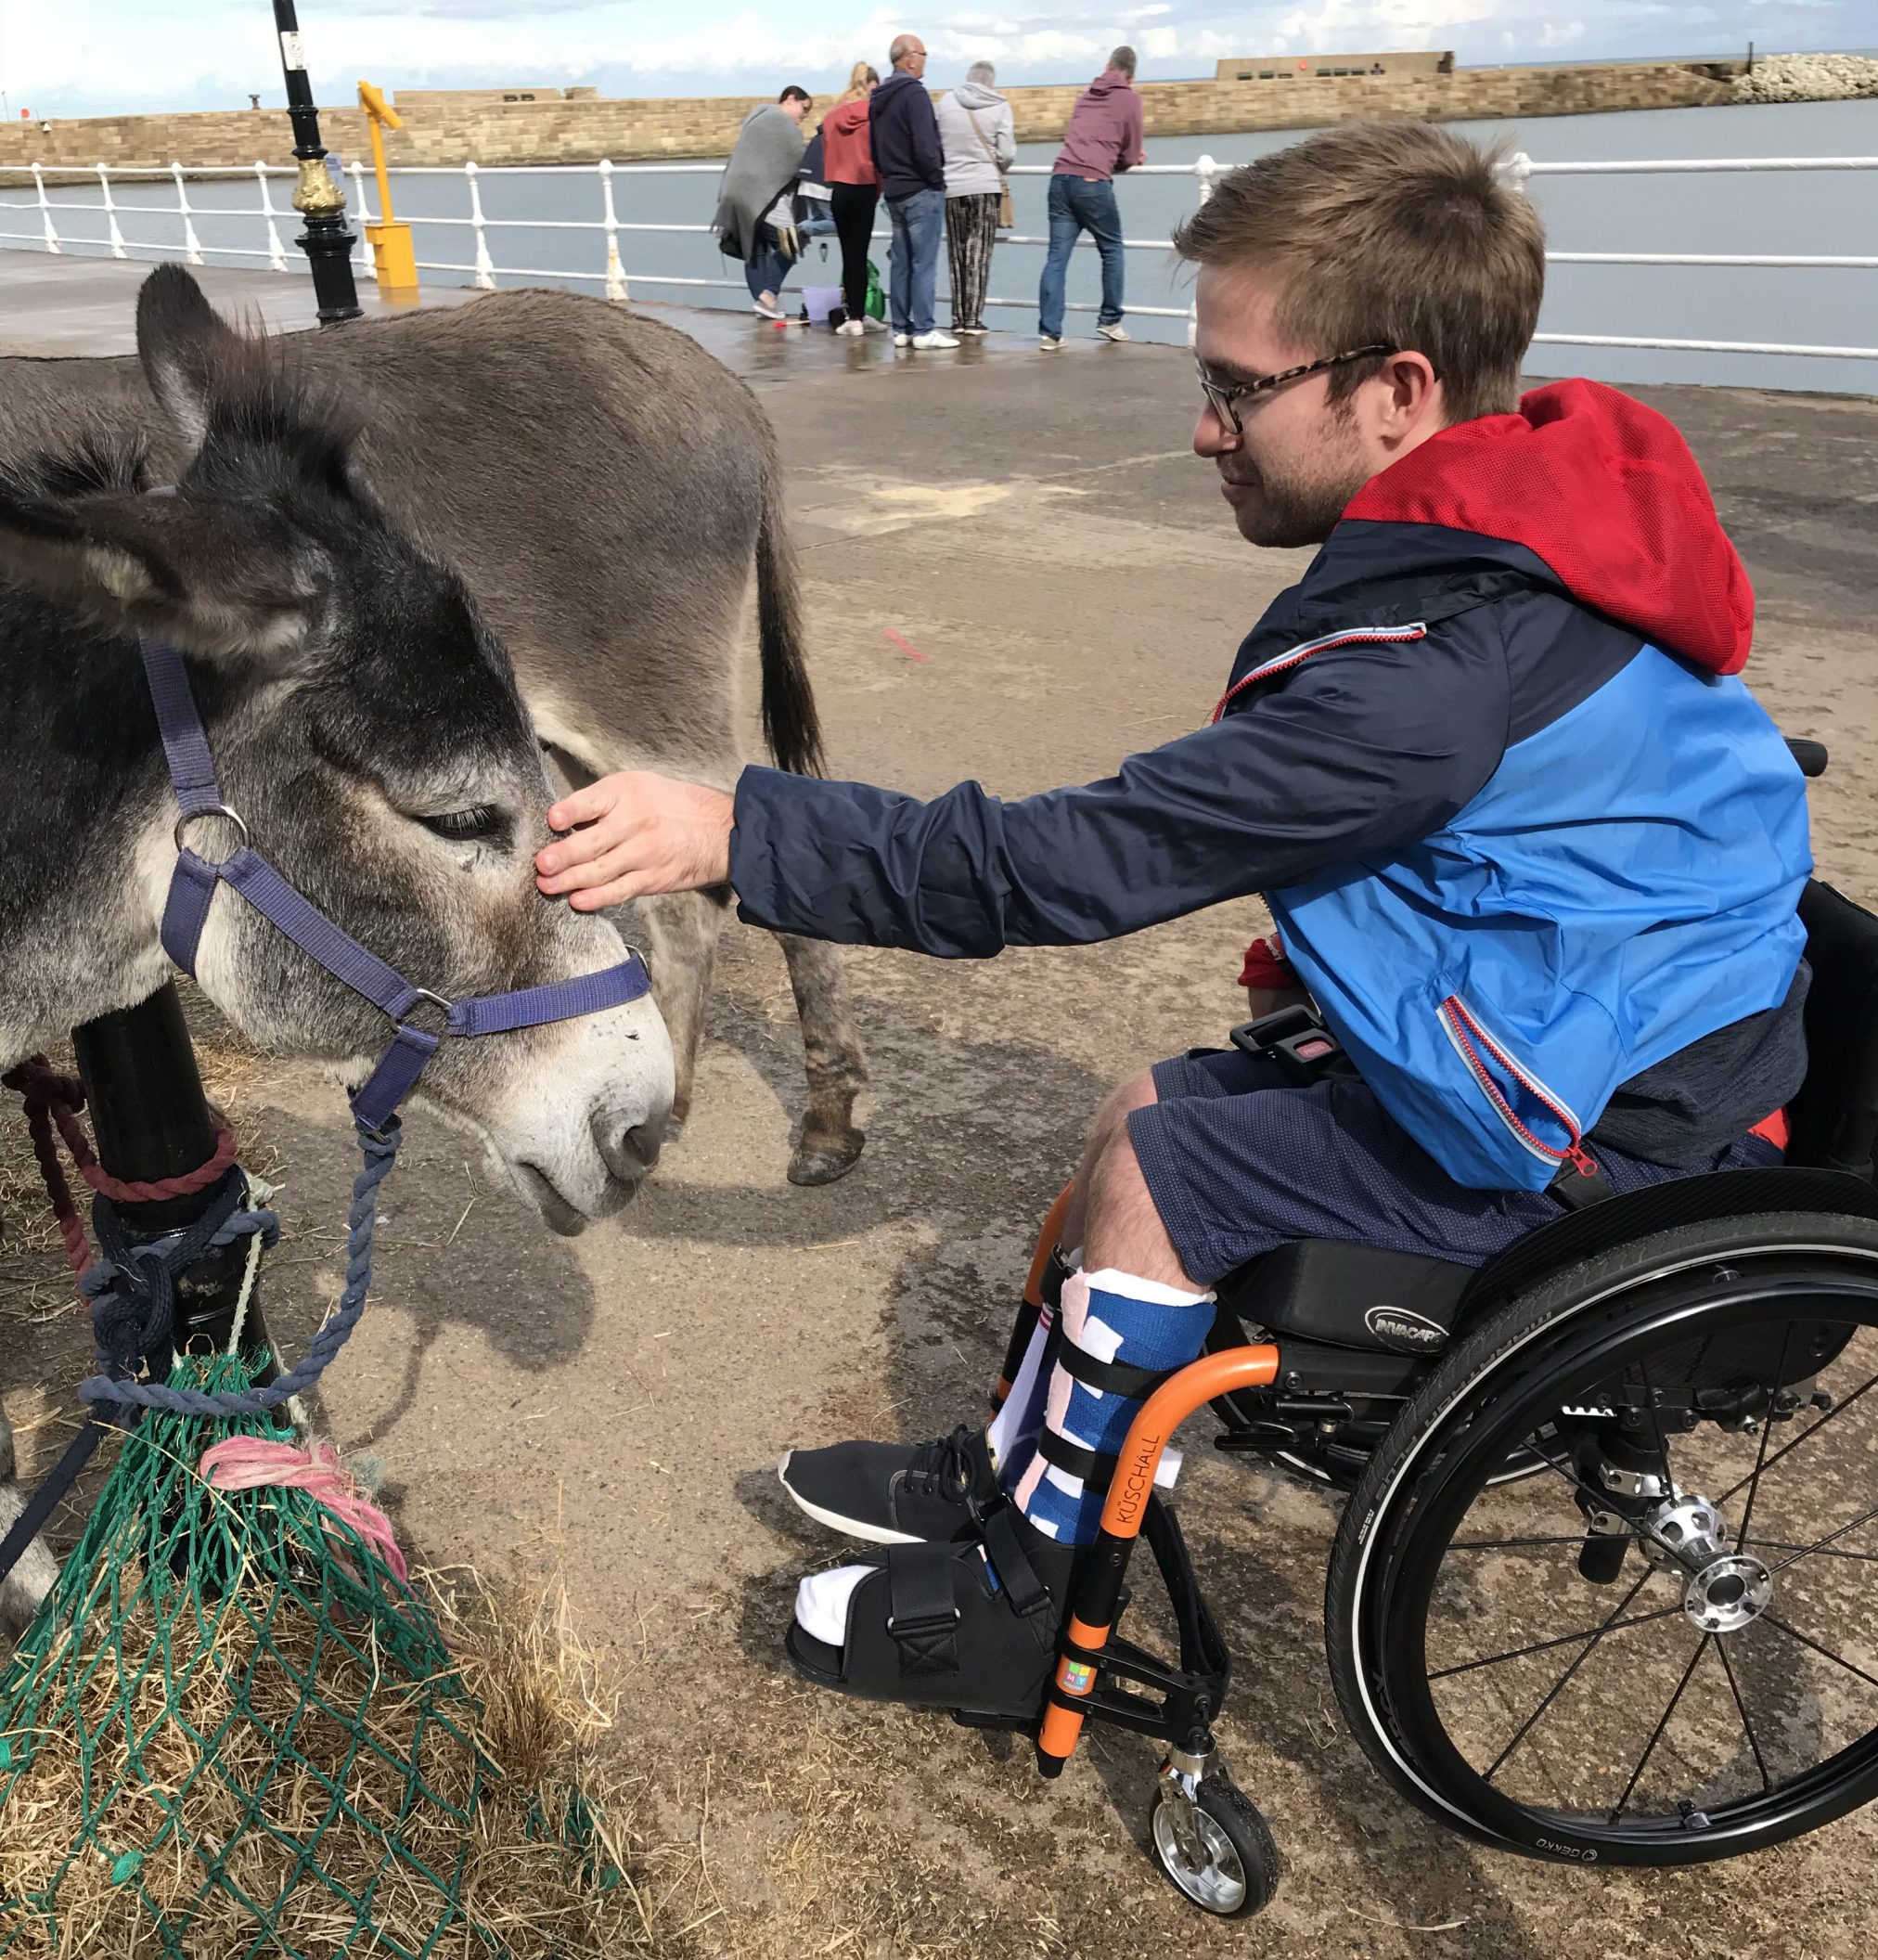 Jamie Green in his new wheelchair in Bridlington, petting donkeys on the seafront